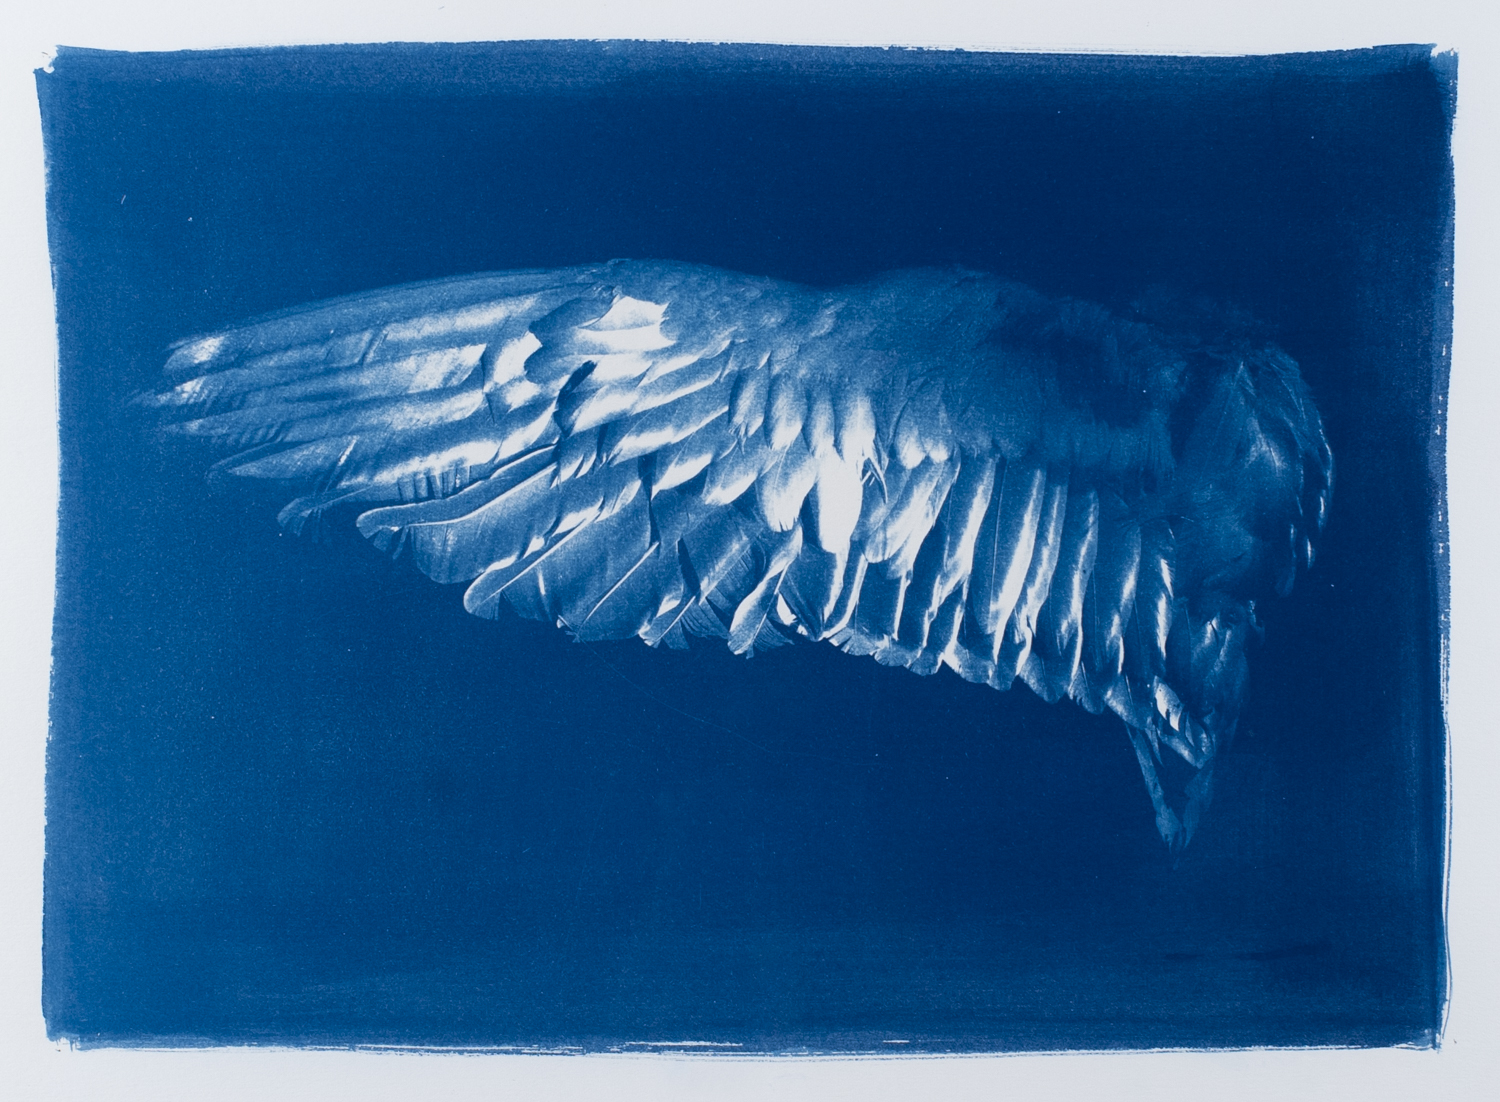 Cyanotype print of an outstretched wing of a bird. The species is unknown, as the museumspecimen that was photographed was not labelled.